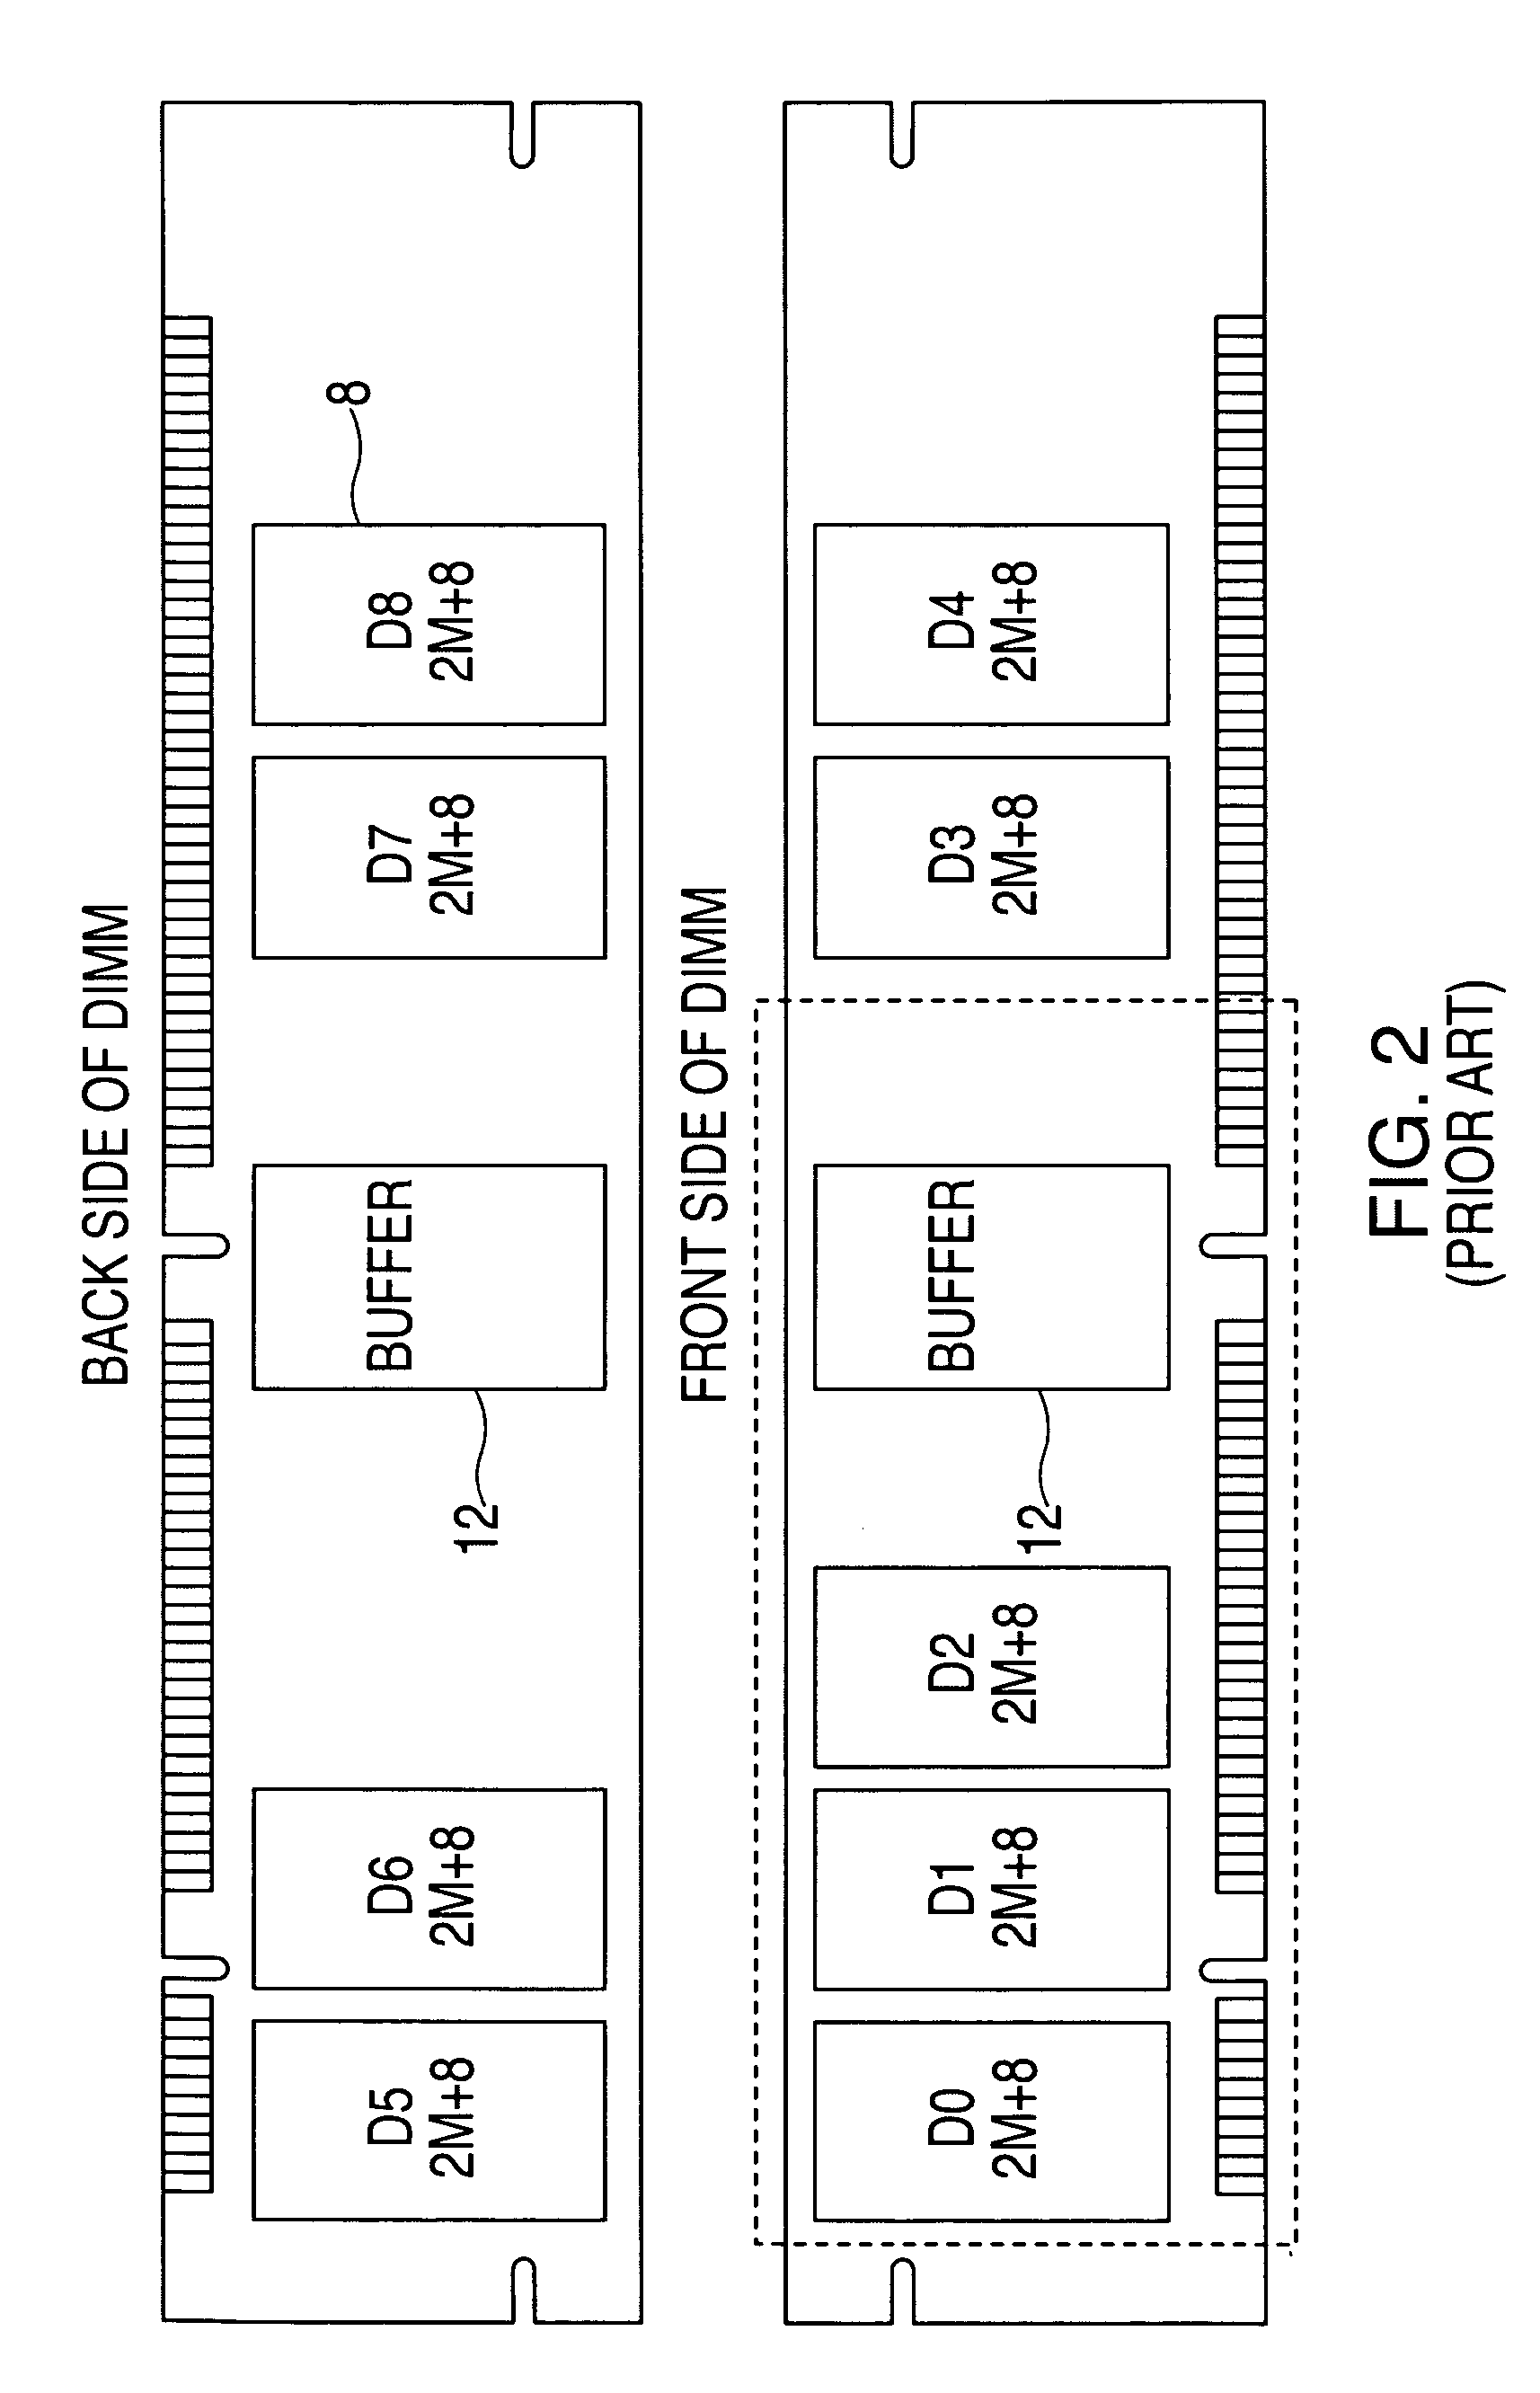 System, method and storage medium for a memory subsystem with positional read data latency